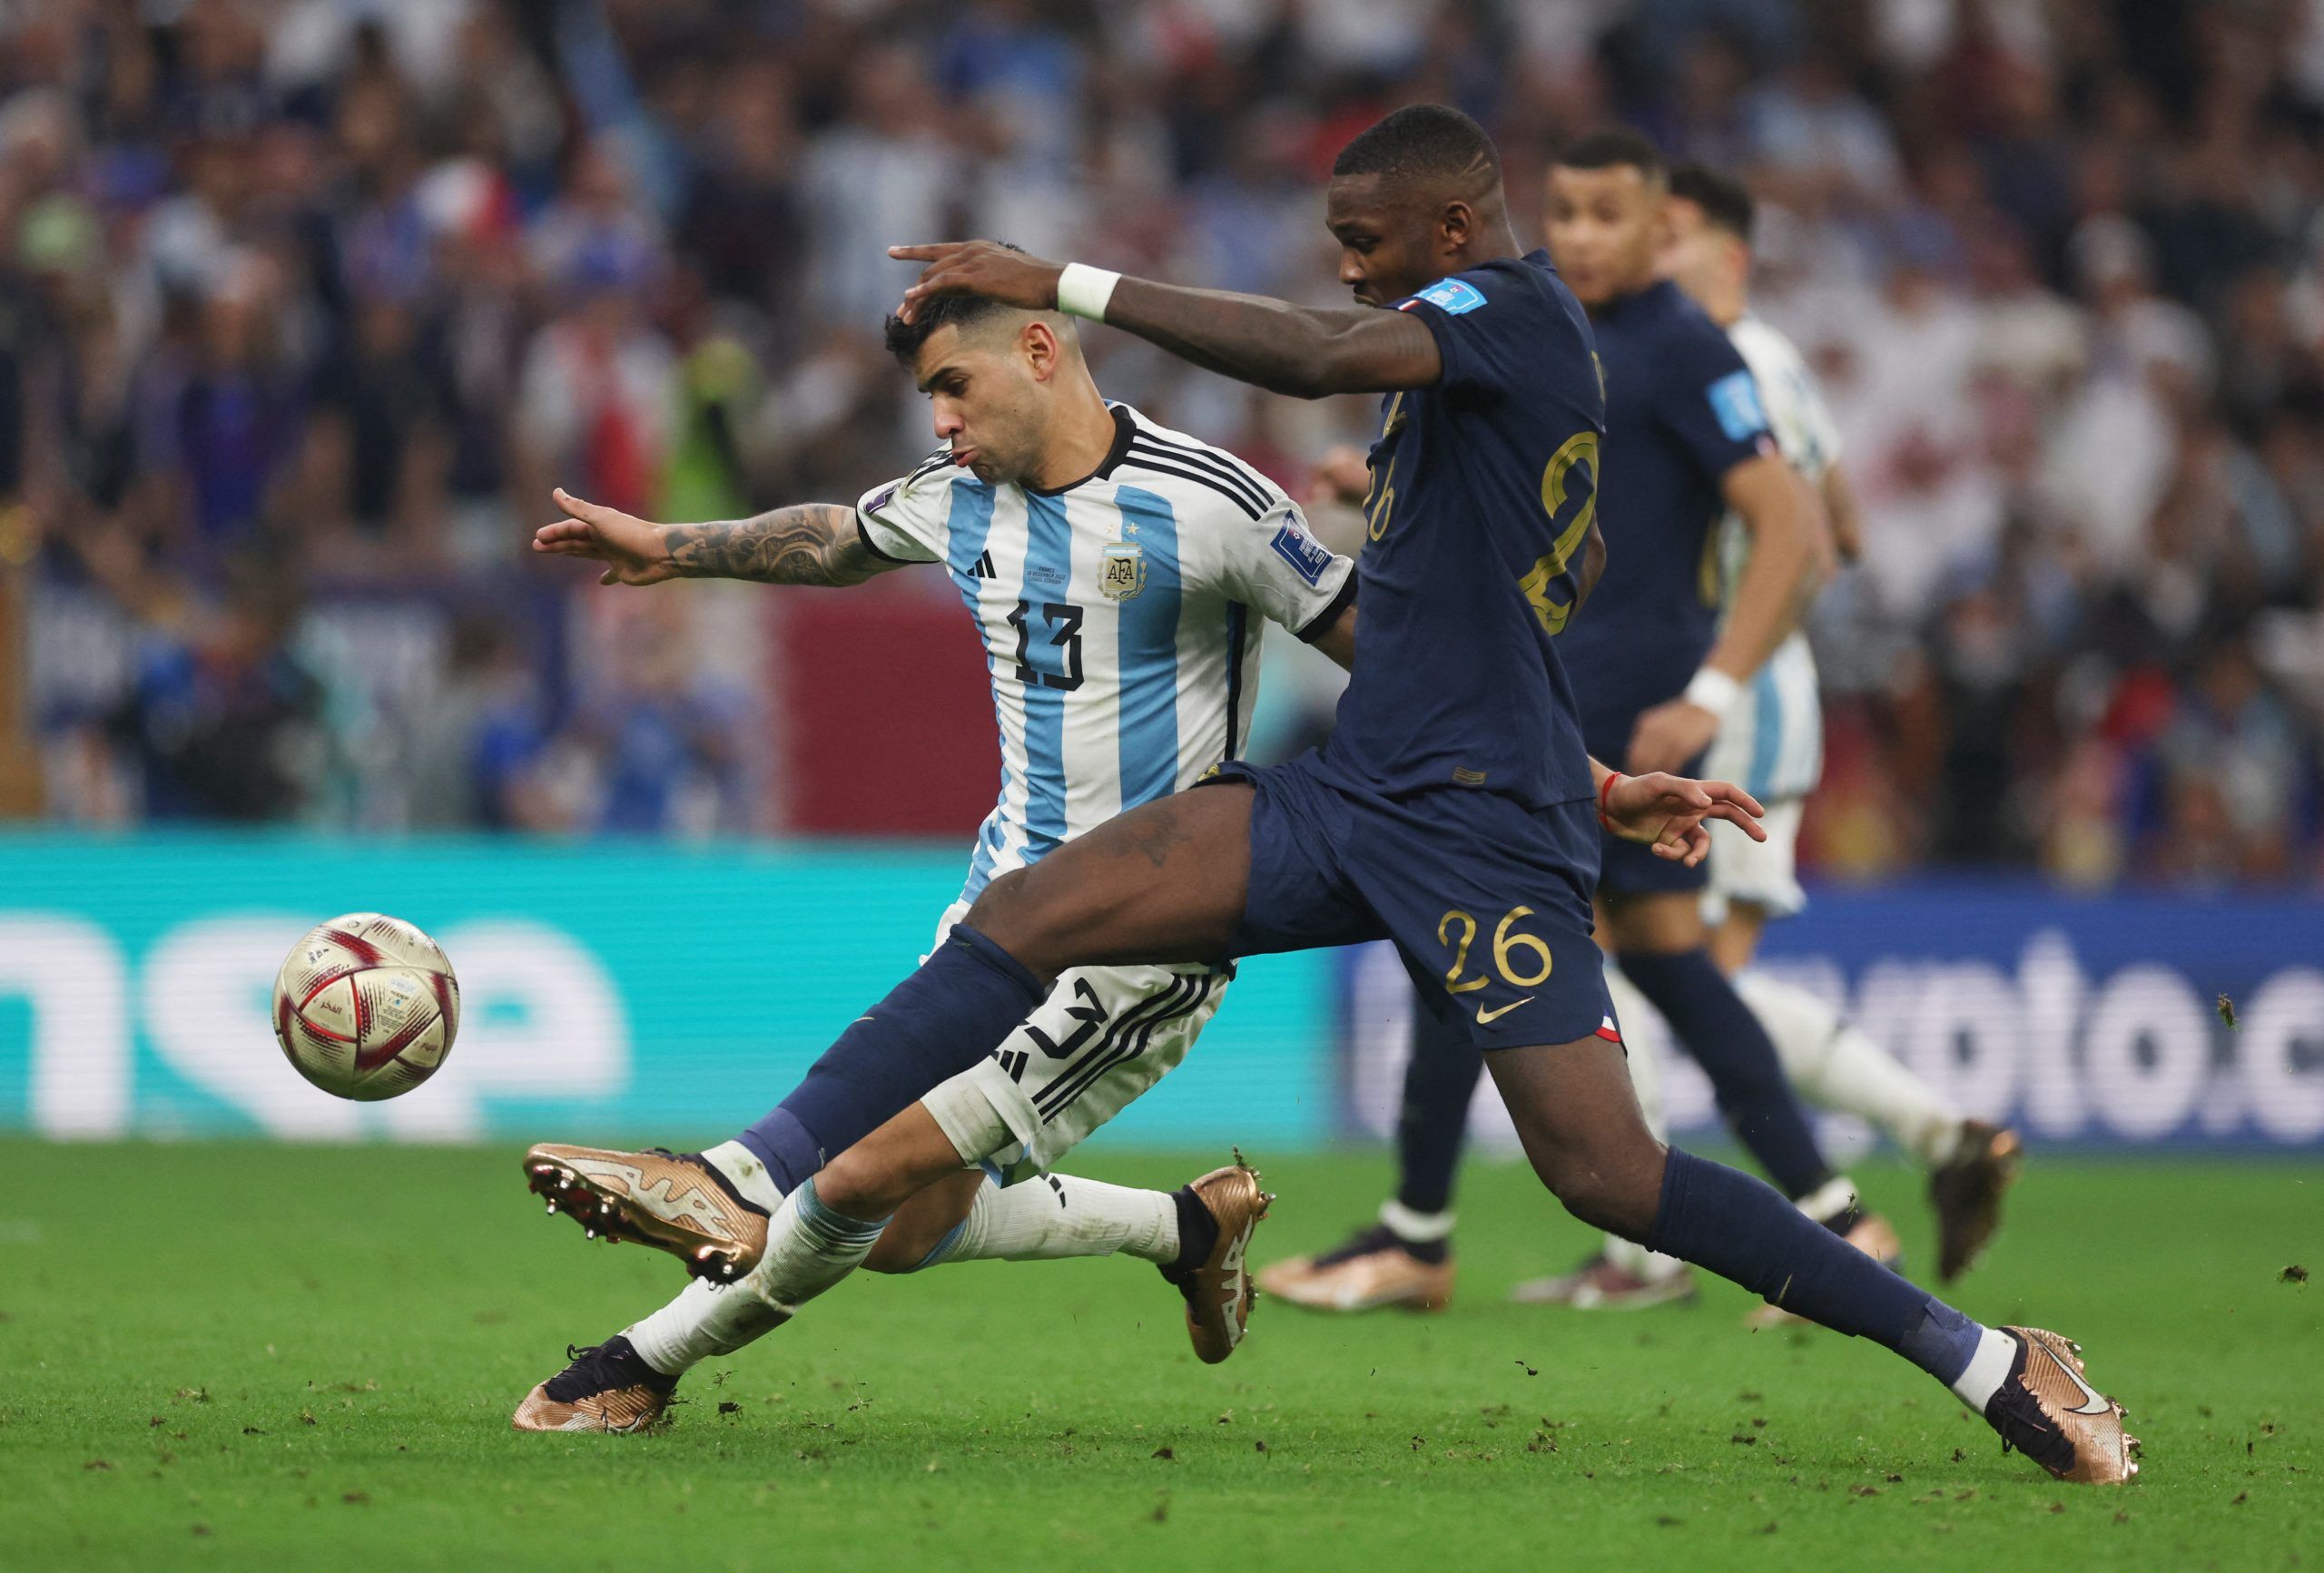 Soccer Football - FIFA World Cup Qatar 2022 - Final - Argentina v France - Lusail Stadium, Lusail, Qatar - December 18, 2022 Argentina's Cristian Romero in action with France's Marcus Thuram REUTERS/Lee Smith